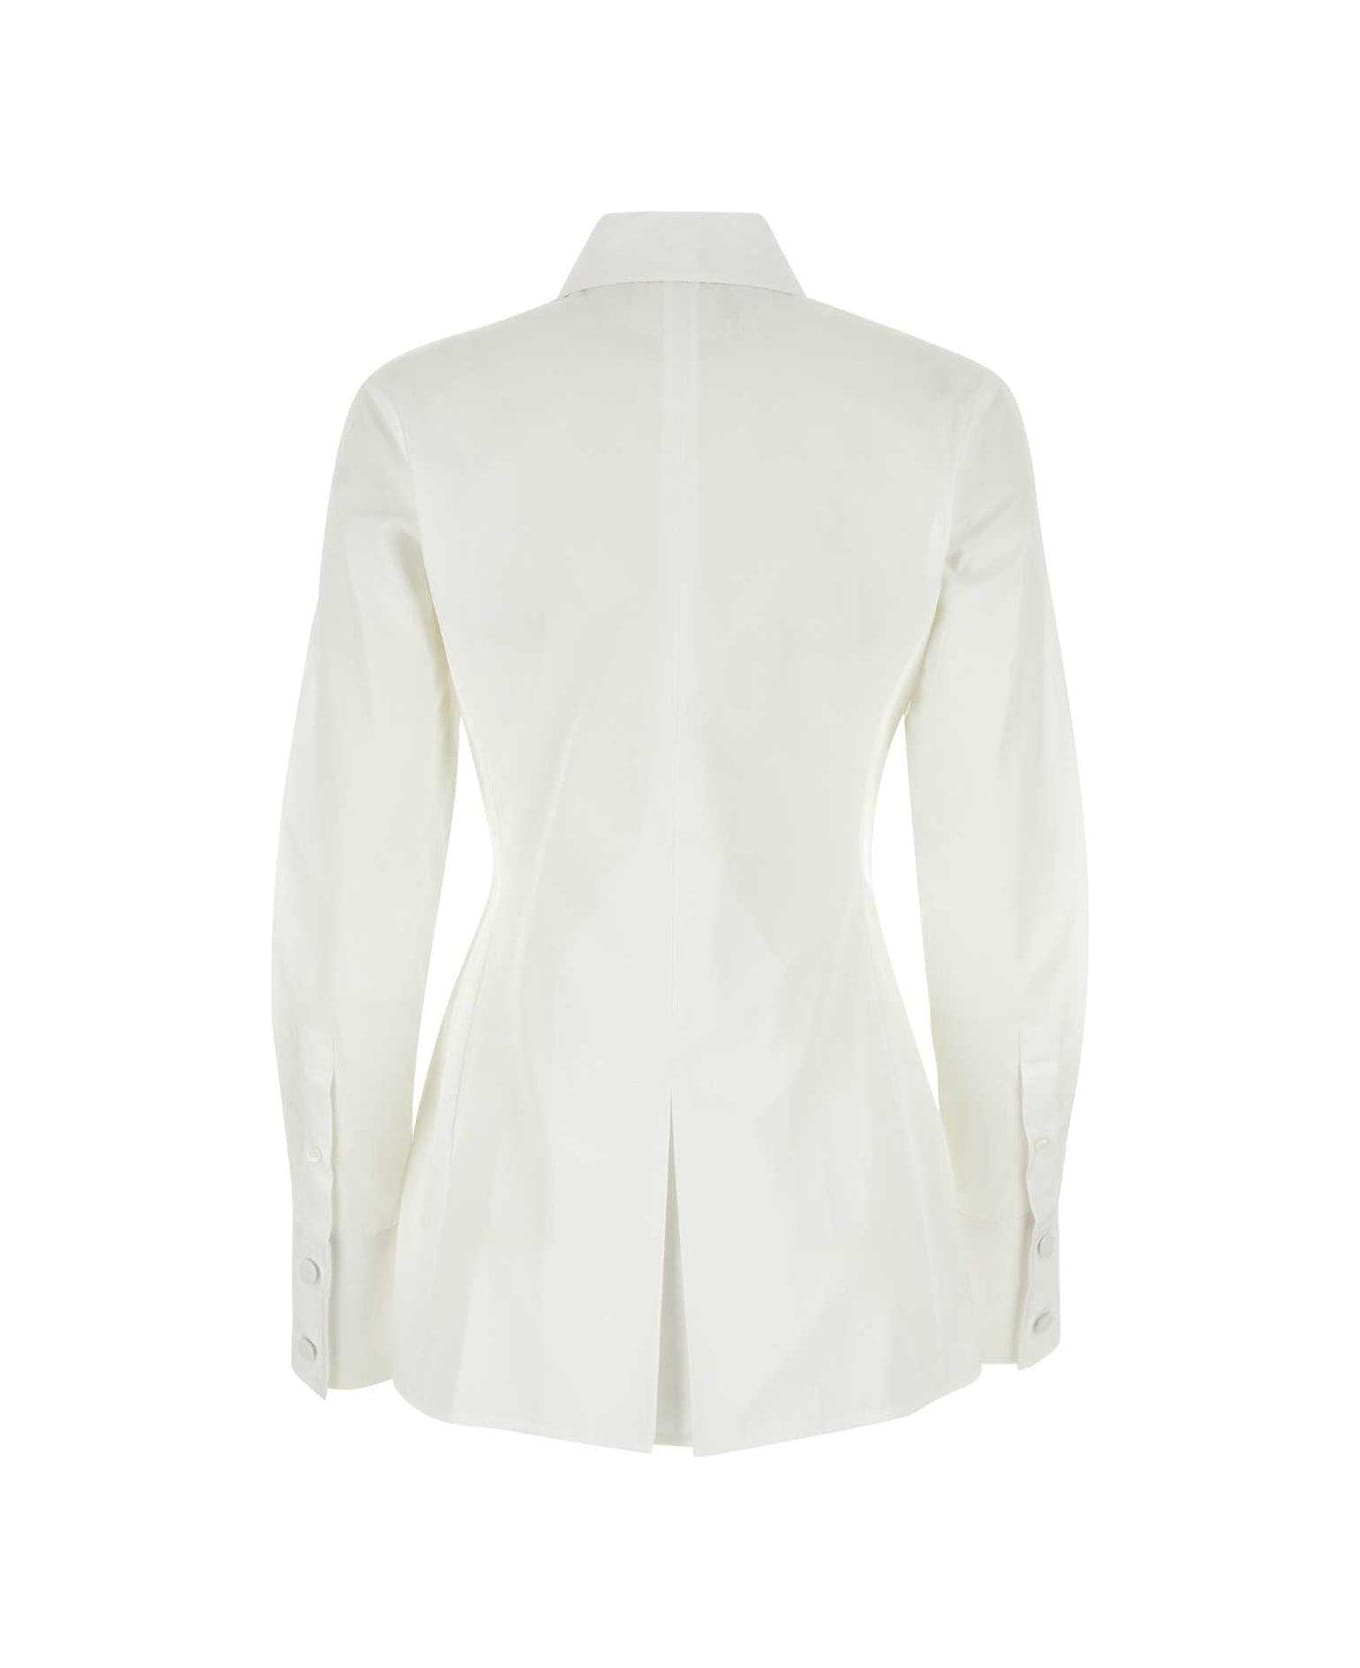 Givenchy Pleated Effect Poplin Shirt - White